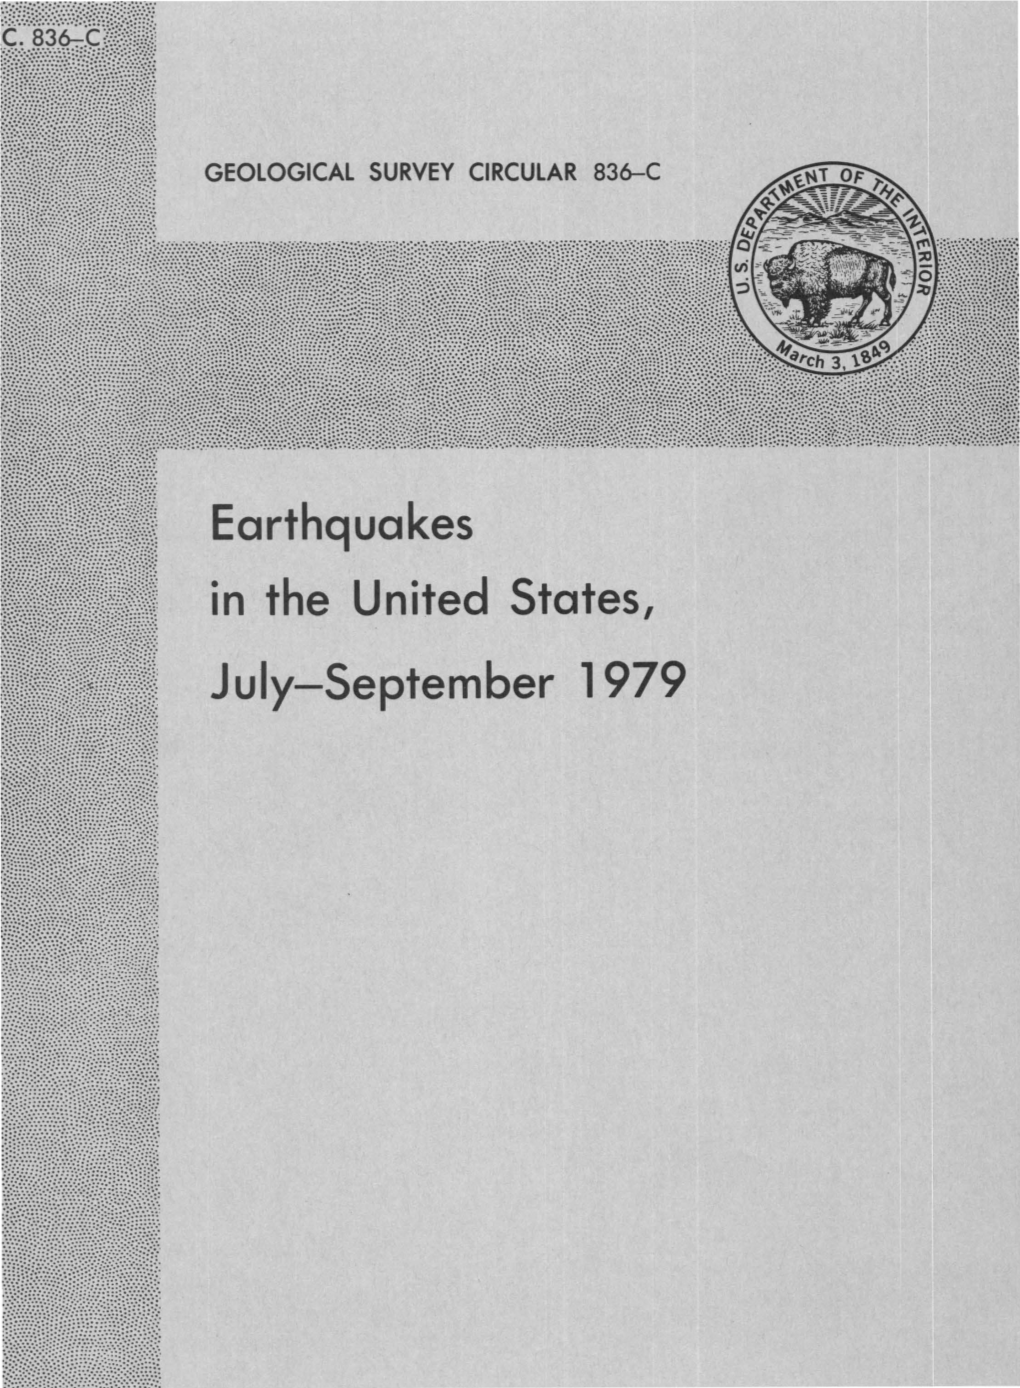 Earthquakes in the United States, July-September 1979